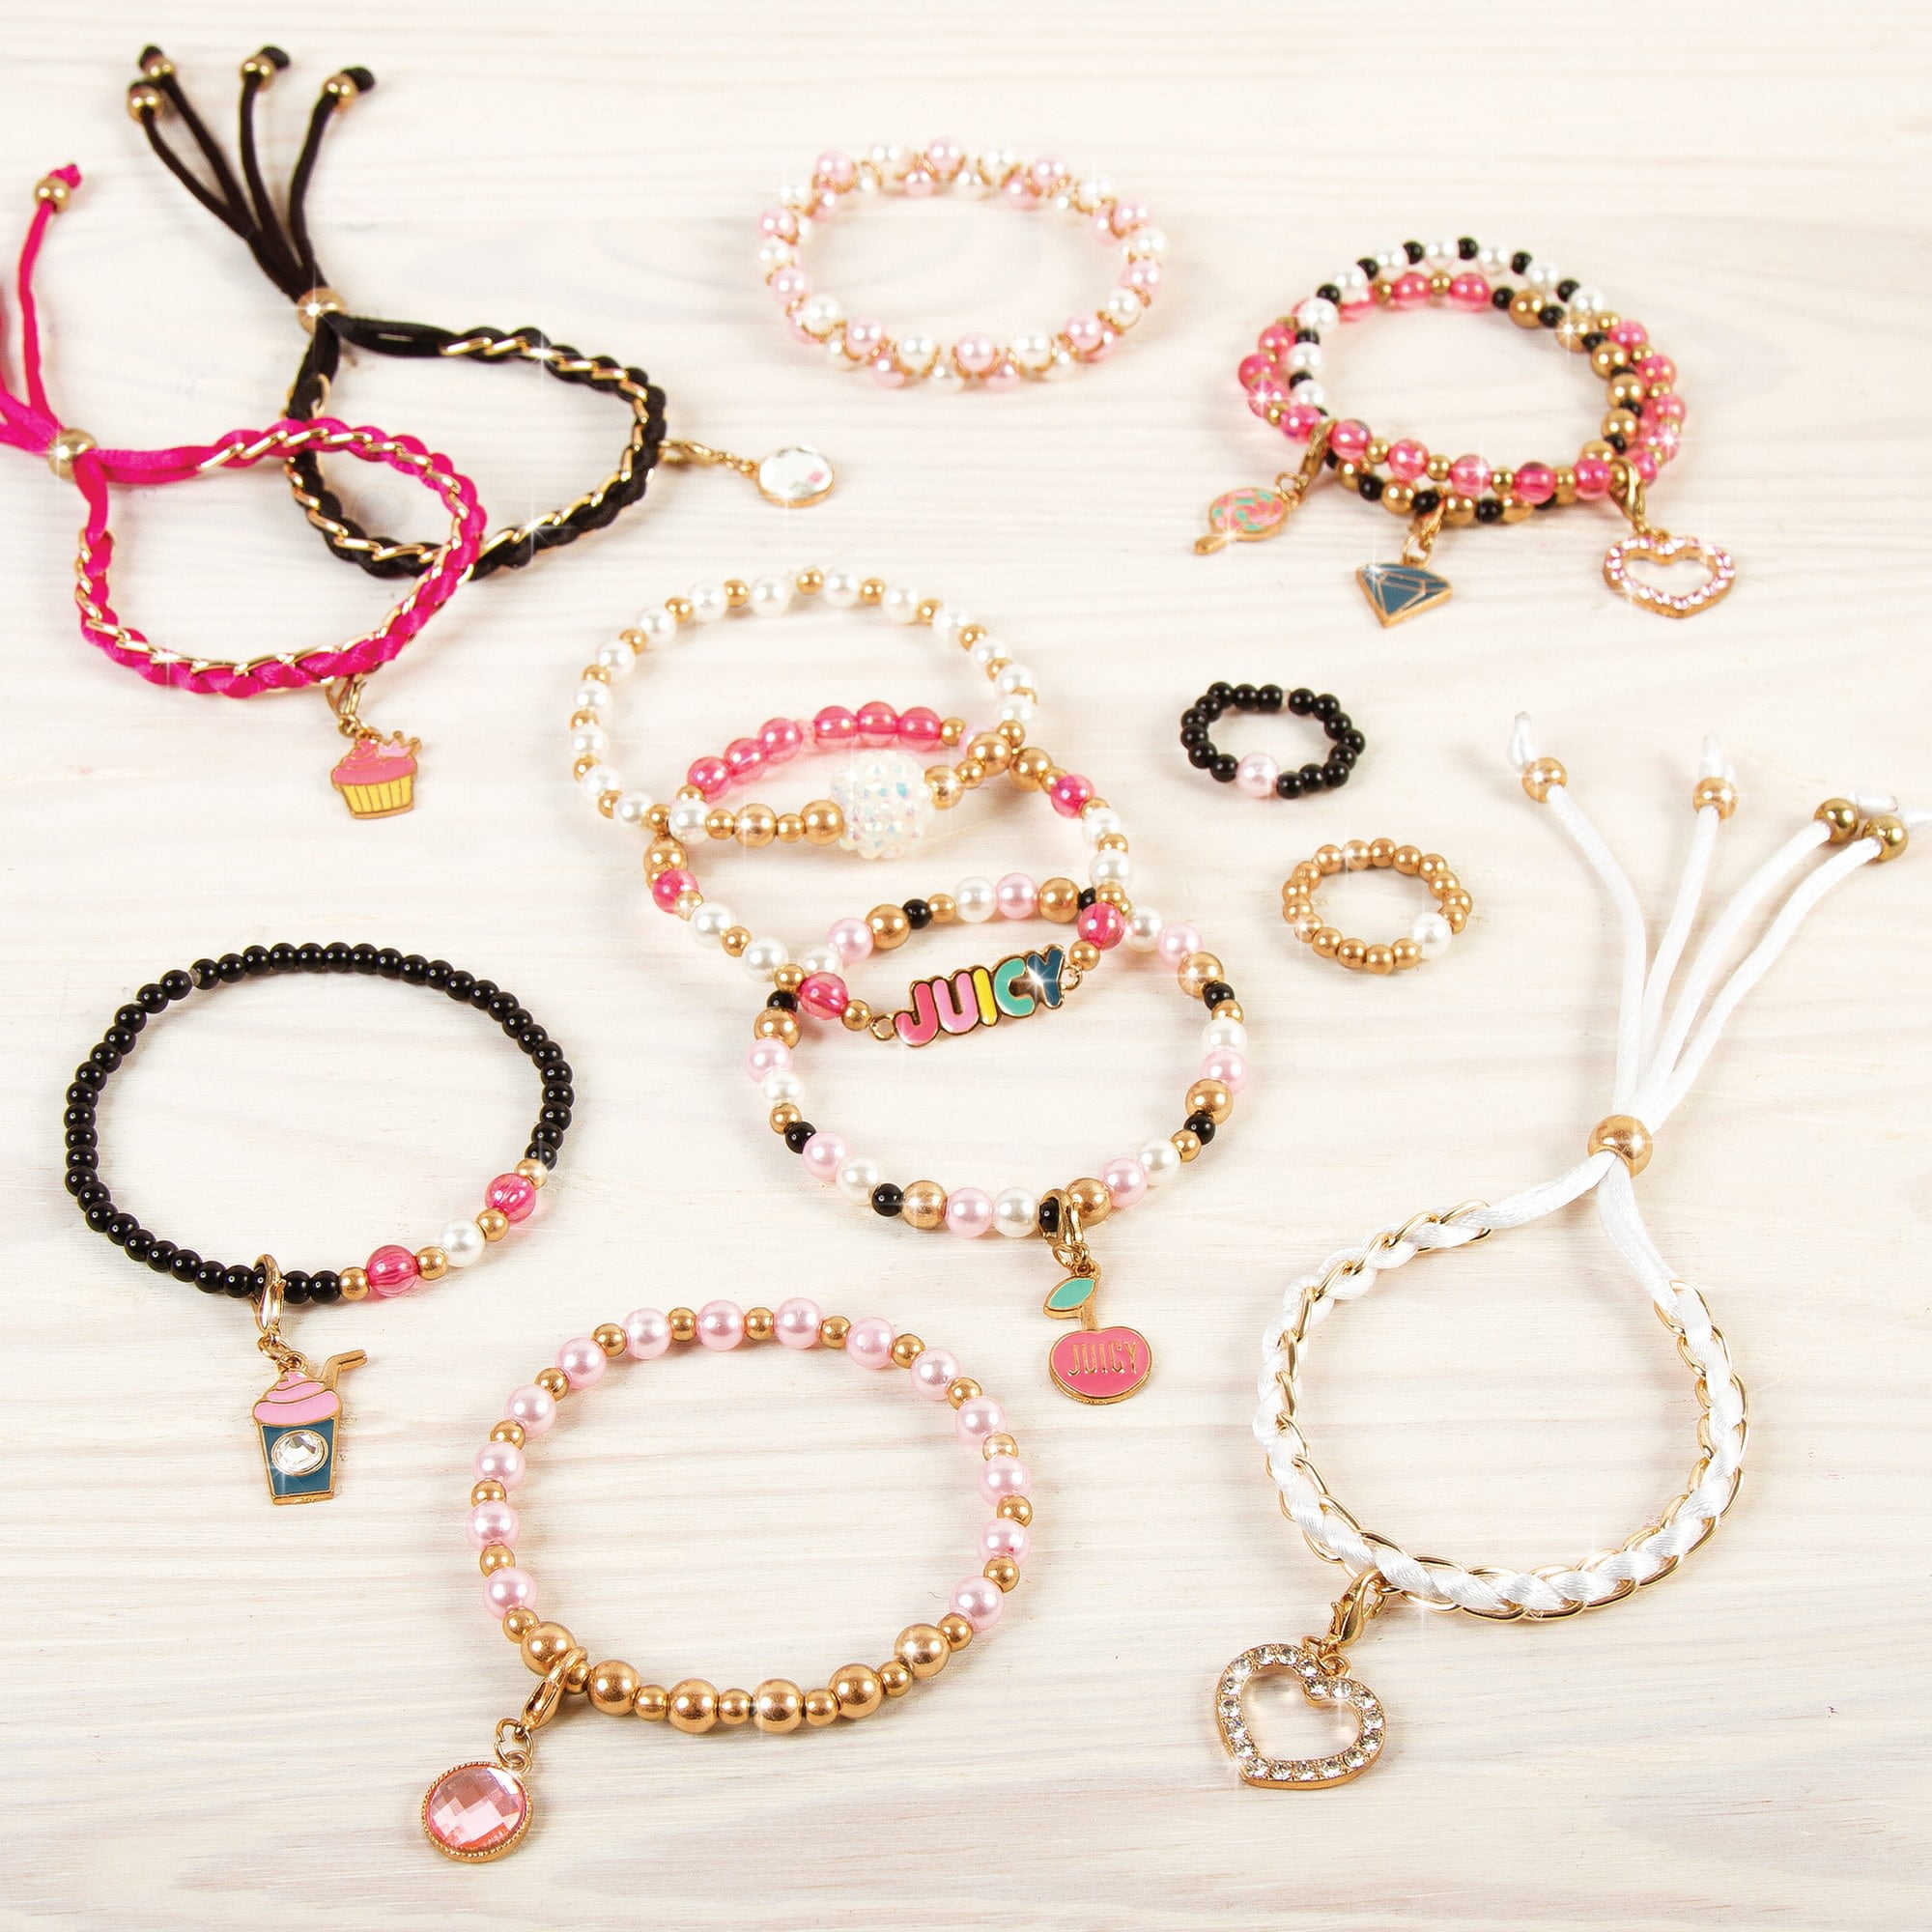 Buy Juicy Couture Absolutely Charming Bracelets Kit